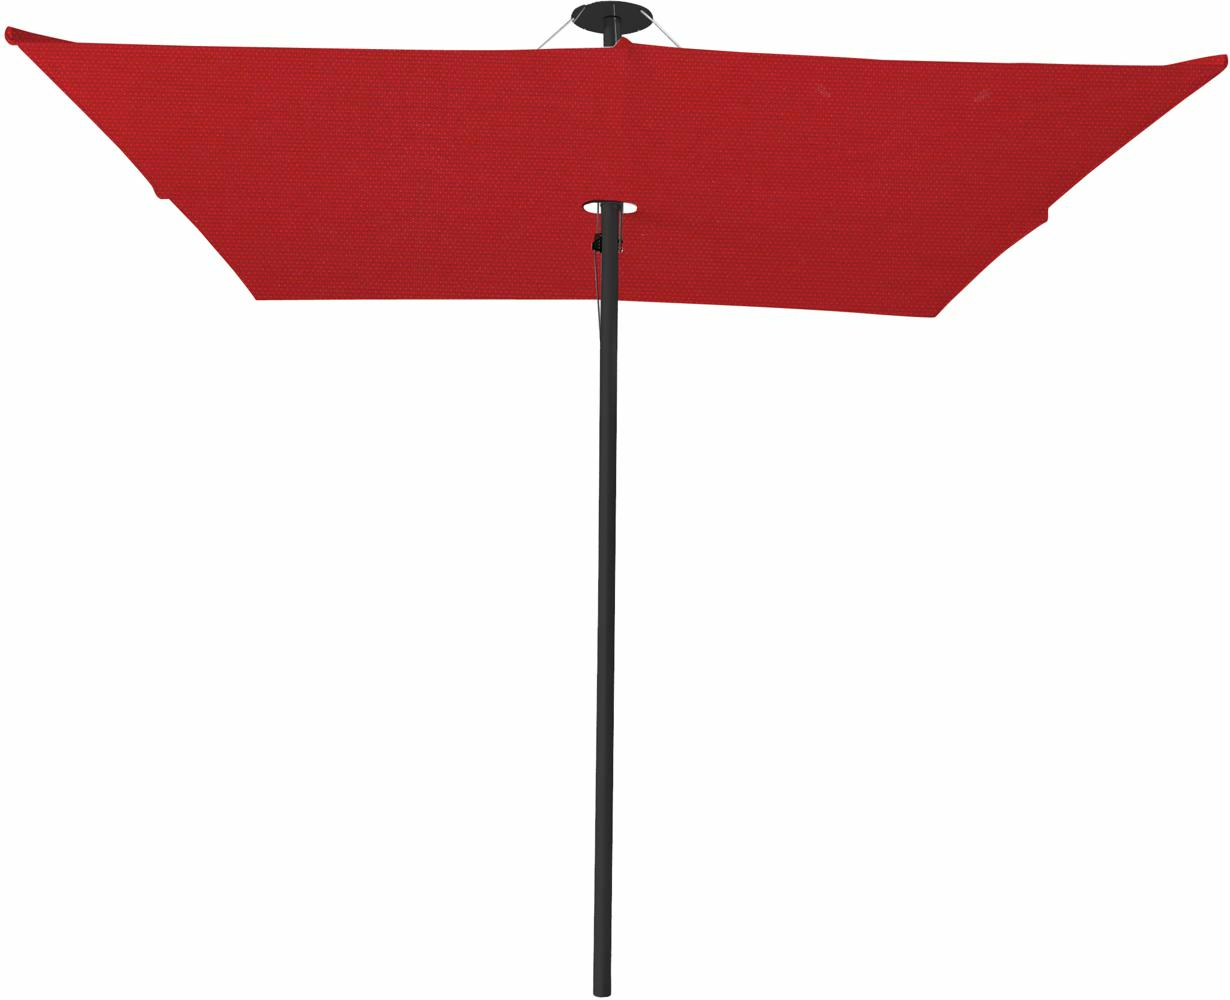 Infina center post umbrella, 3 m square, with frame in Dusk and Solidum Pepper canopy. 